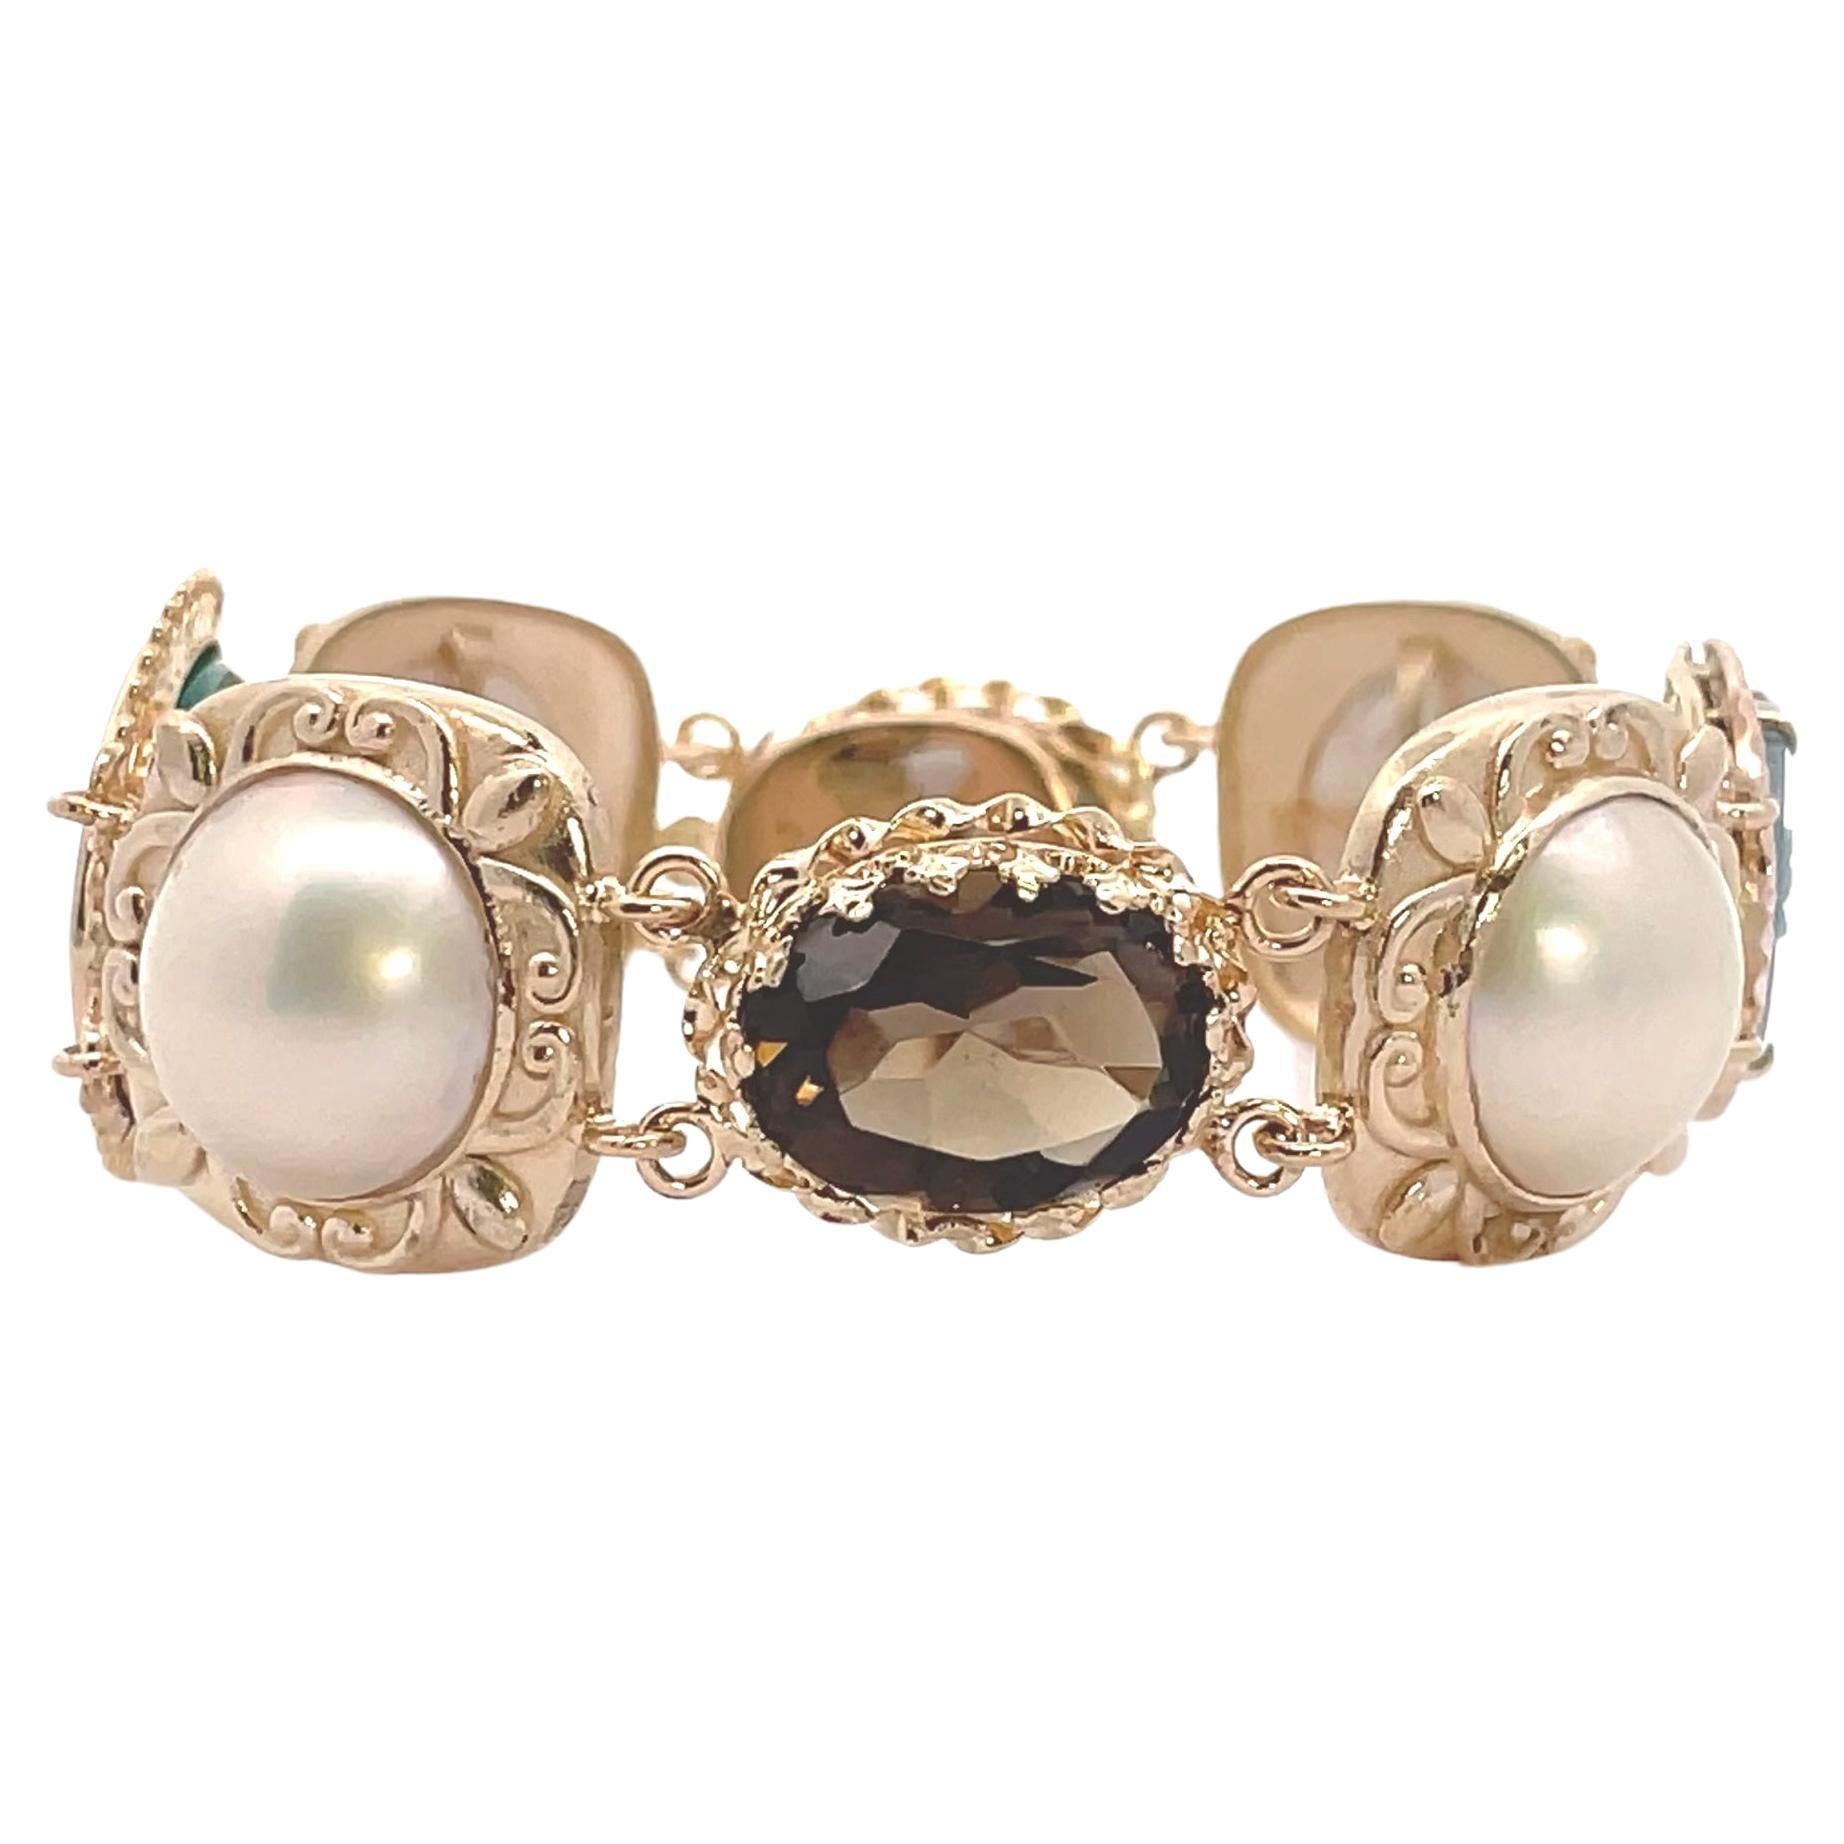 One of a kind 14K yellow gold bracelet composed of vintage components. The bracelet features 4 mobe pearls, two cameos and two oval shape smokey topaz.  One cameo is carved from green onyx depicting the profile of a woman and the other cameo is